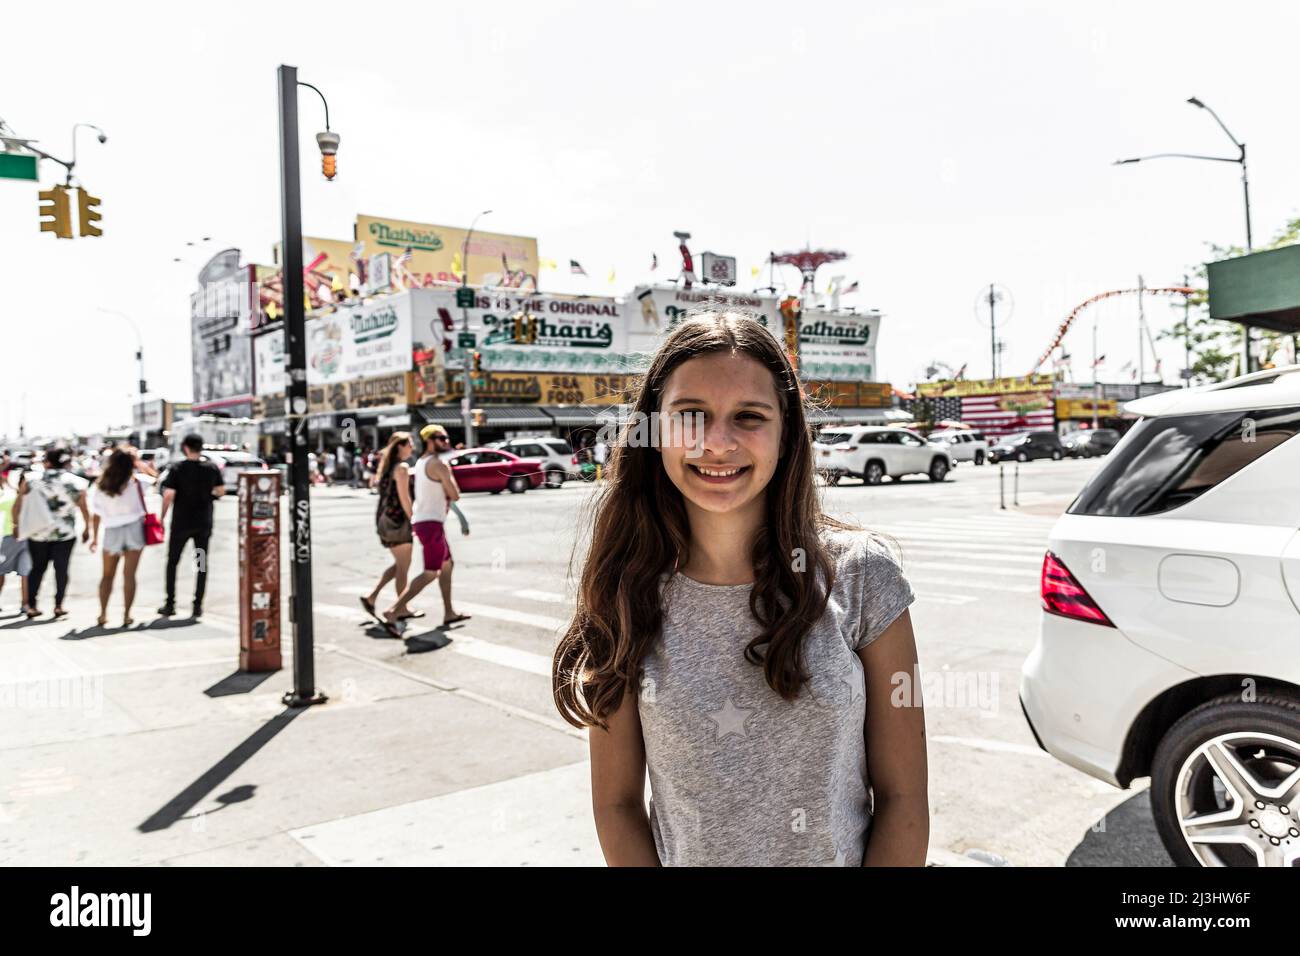 SURF AvE/STILLWELL Av, New York City, NY, USA, 14 years old, caucasian teenager girl with brown hair at a crossing in Coney Island Stock Photo